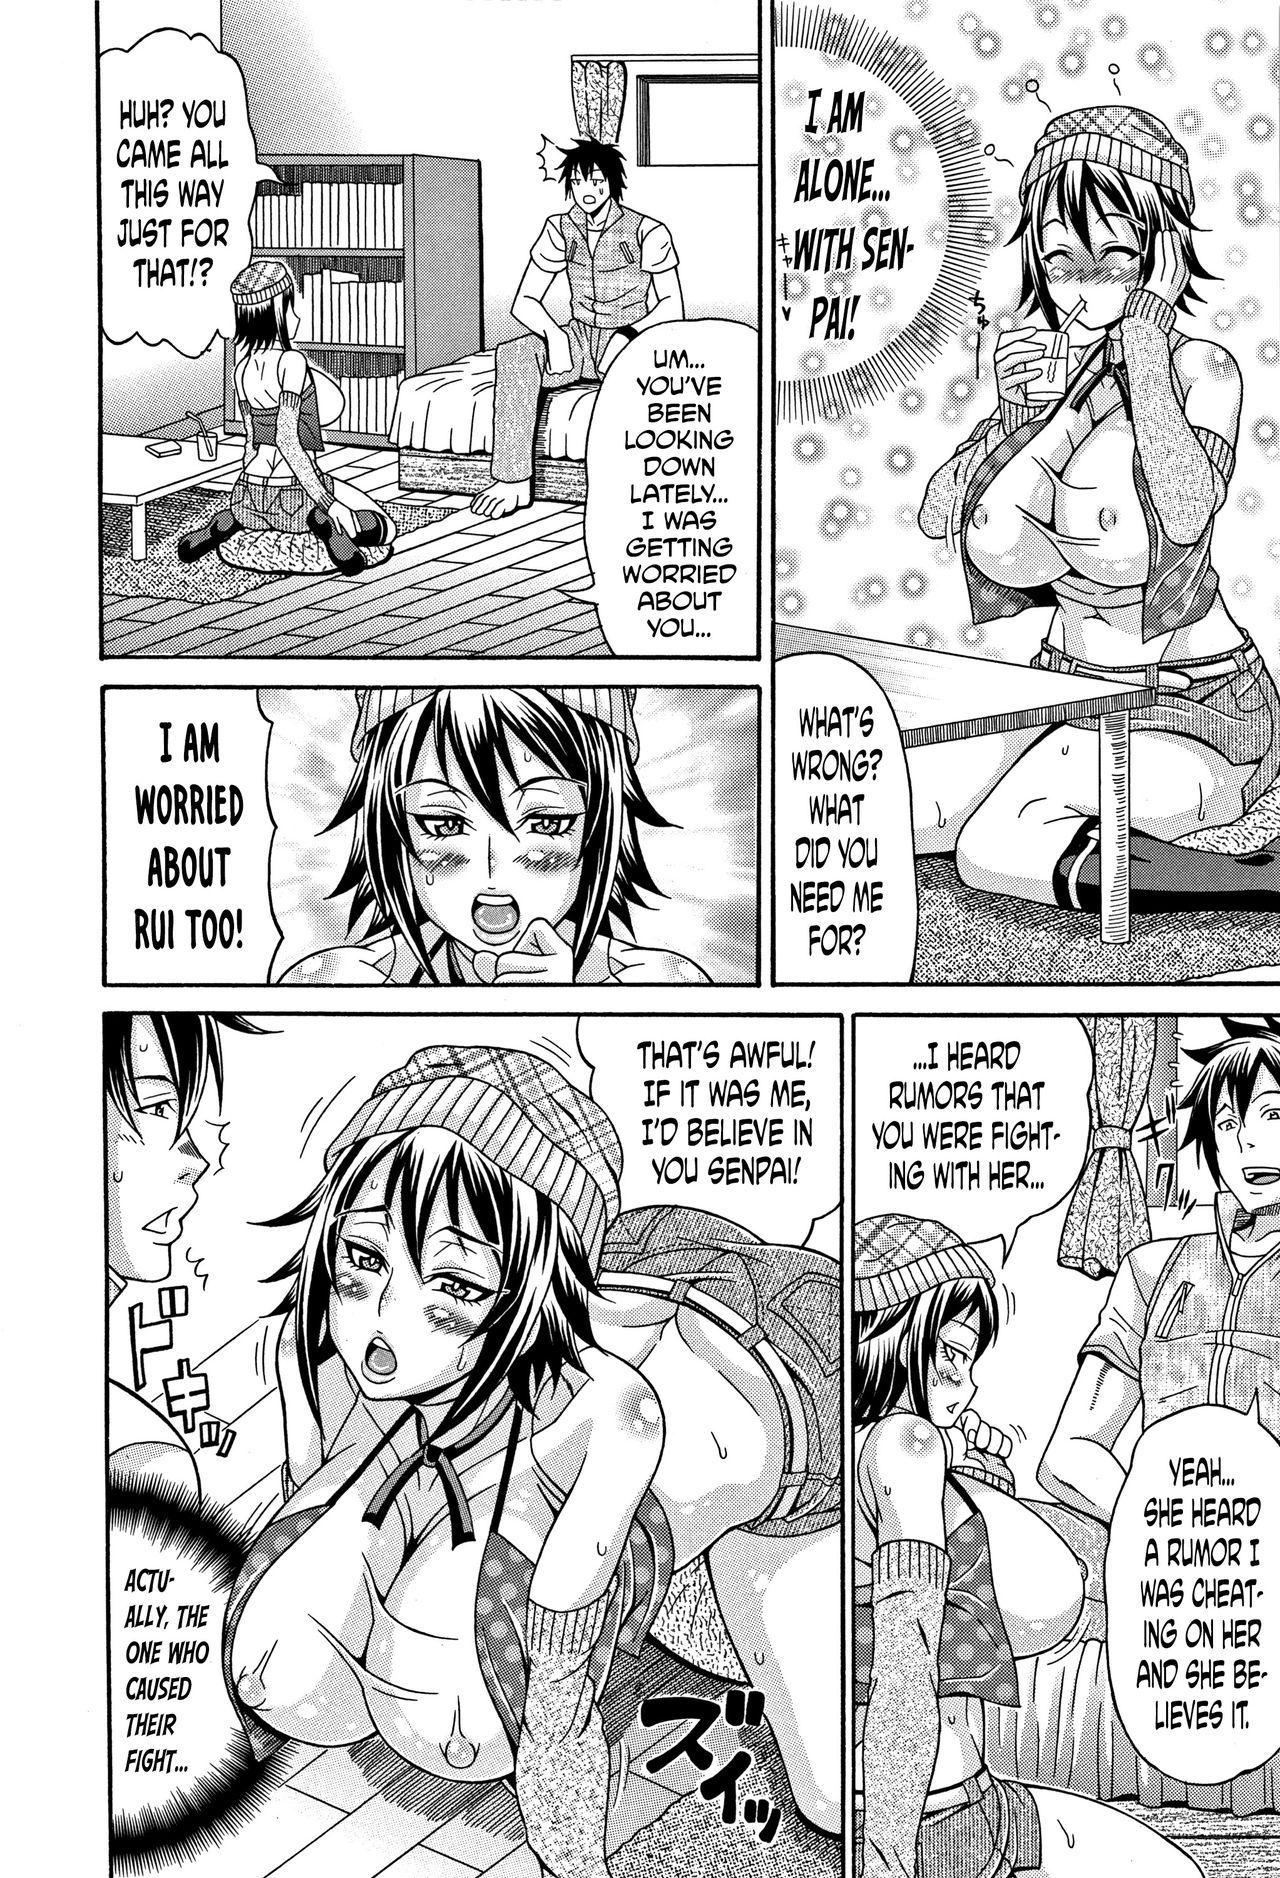 [Andou Hiroyuki] Mamire Chichi - Sticky Tits Feel Hot All Over. Ch.1-4 [English] [doujin-moe.us] 56